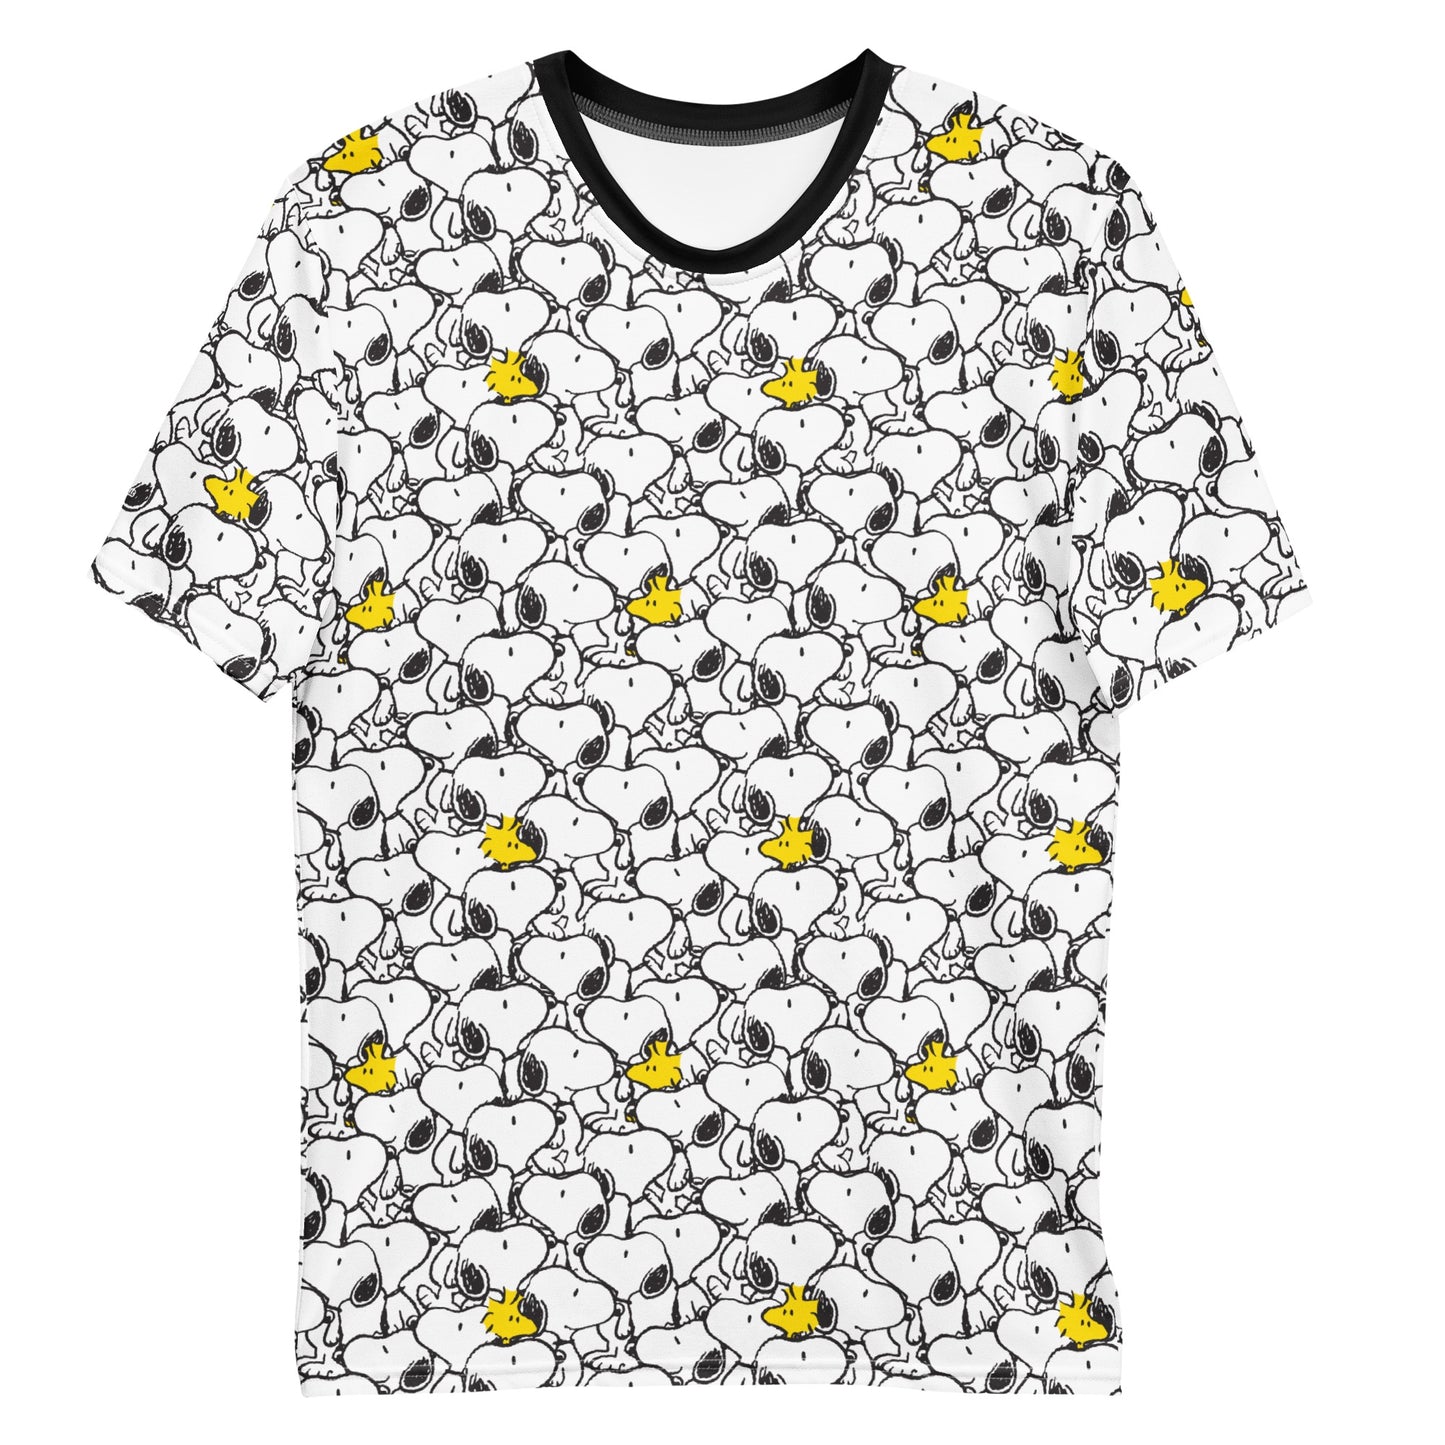 Snoopy and Woodstock Repeat Adult T-Shirt